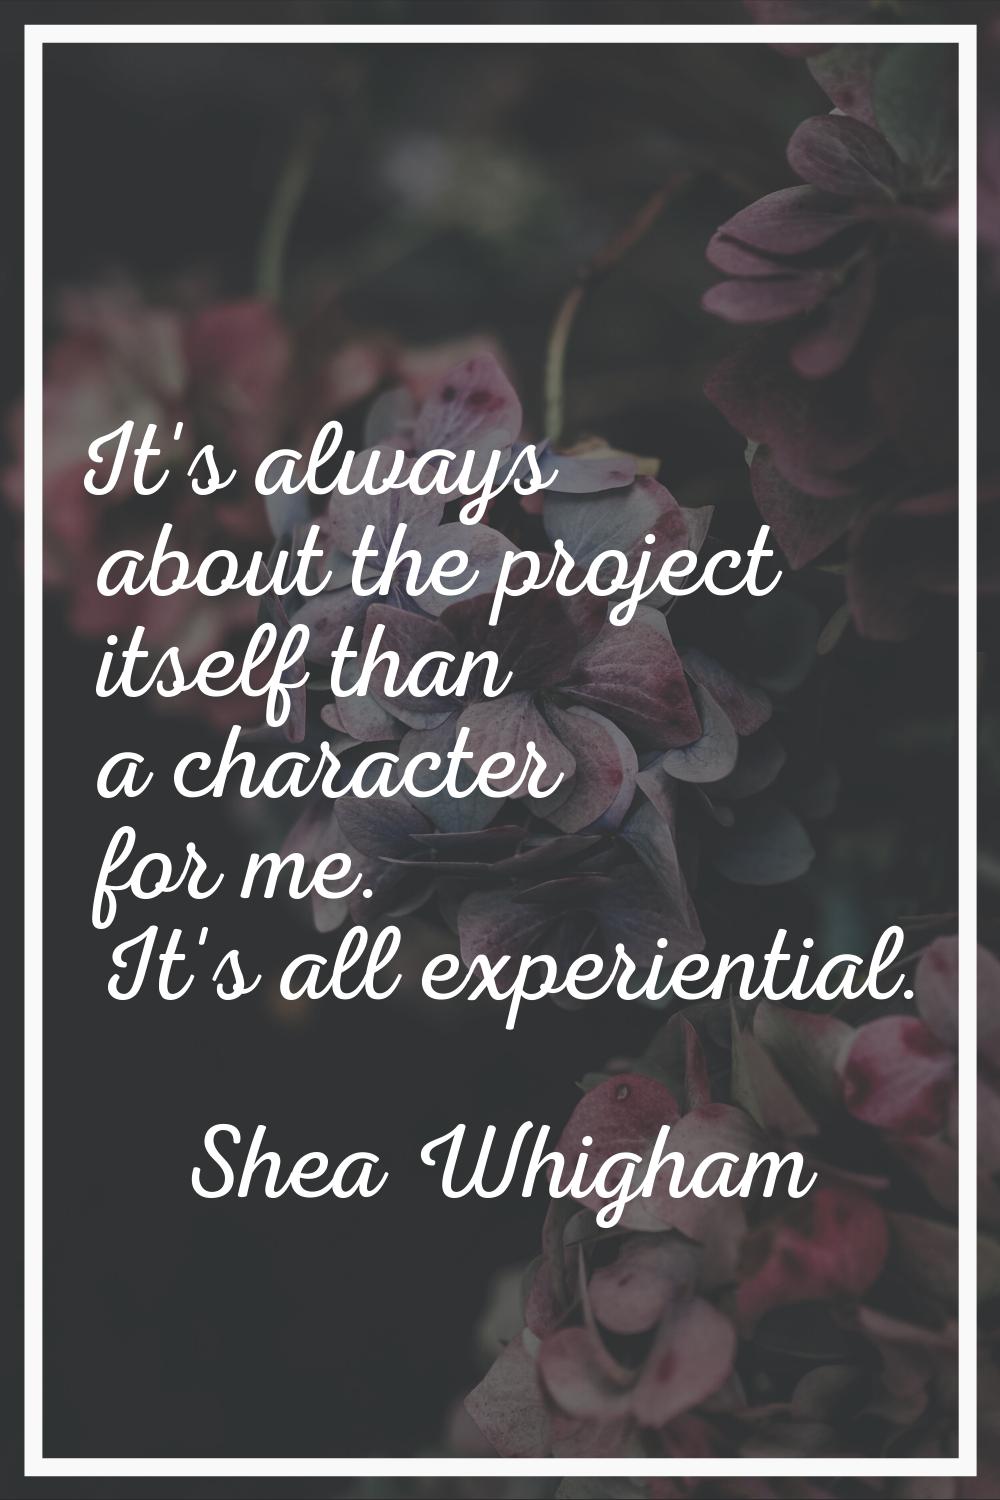 It's always about the project itself than a character for me. It's all experiential.